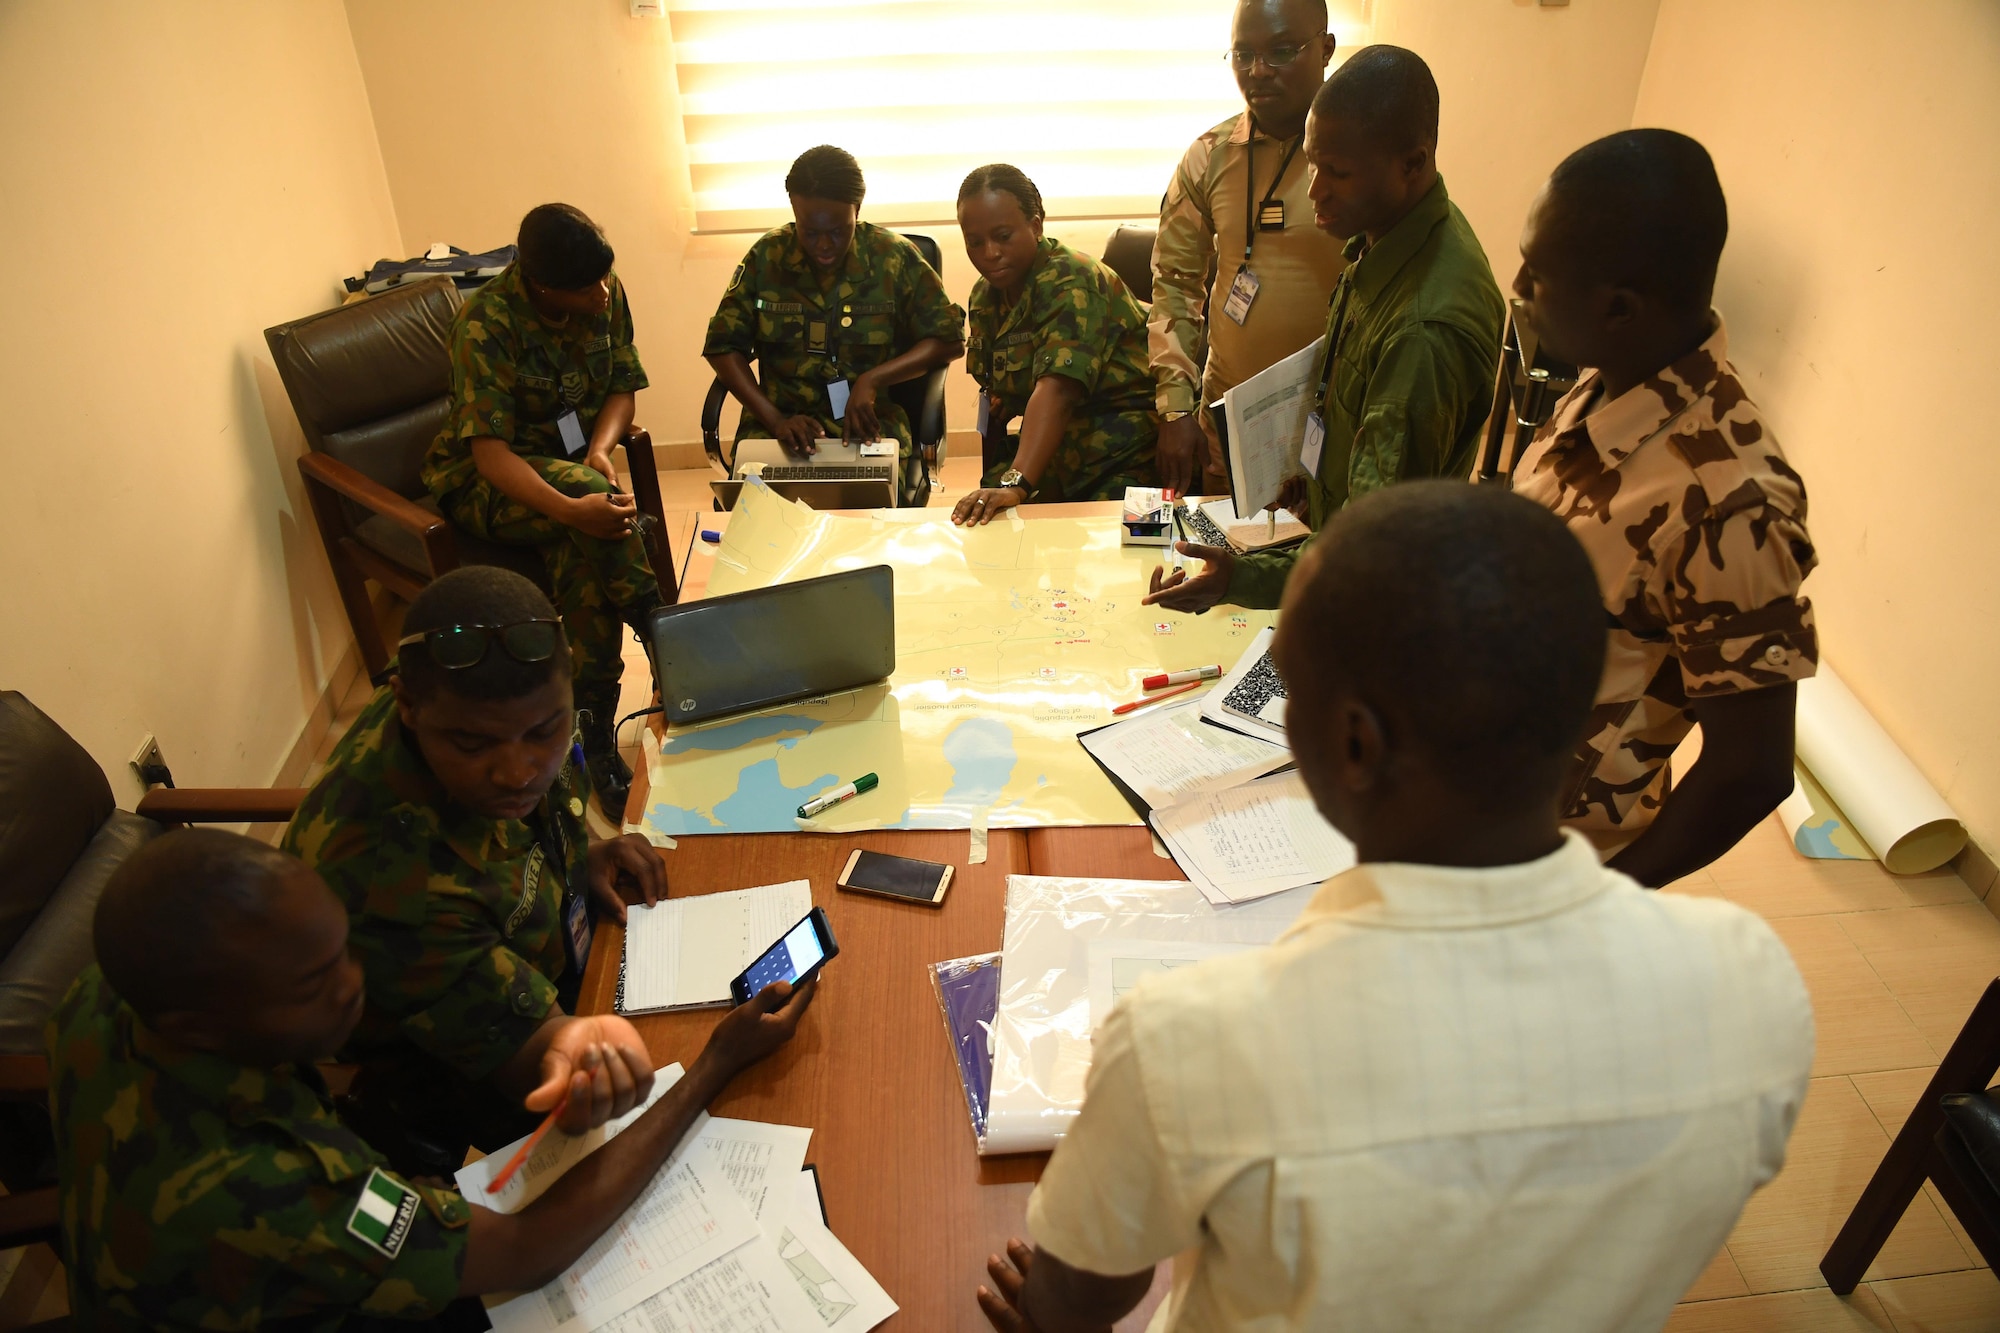 Airmen from Nigeria, Niger, Chad, and Benin discuss options for aeromedical support during African Partnership Flight Nigeria, Lagos, Nigeria, Aug. 17, 2017.